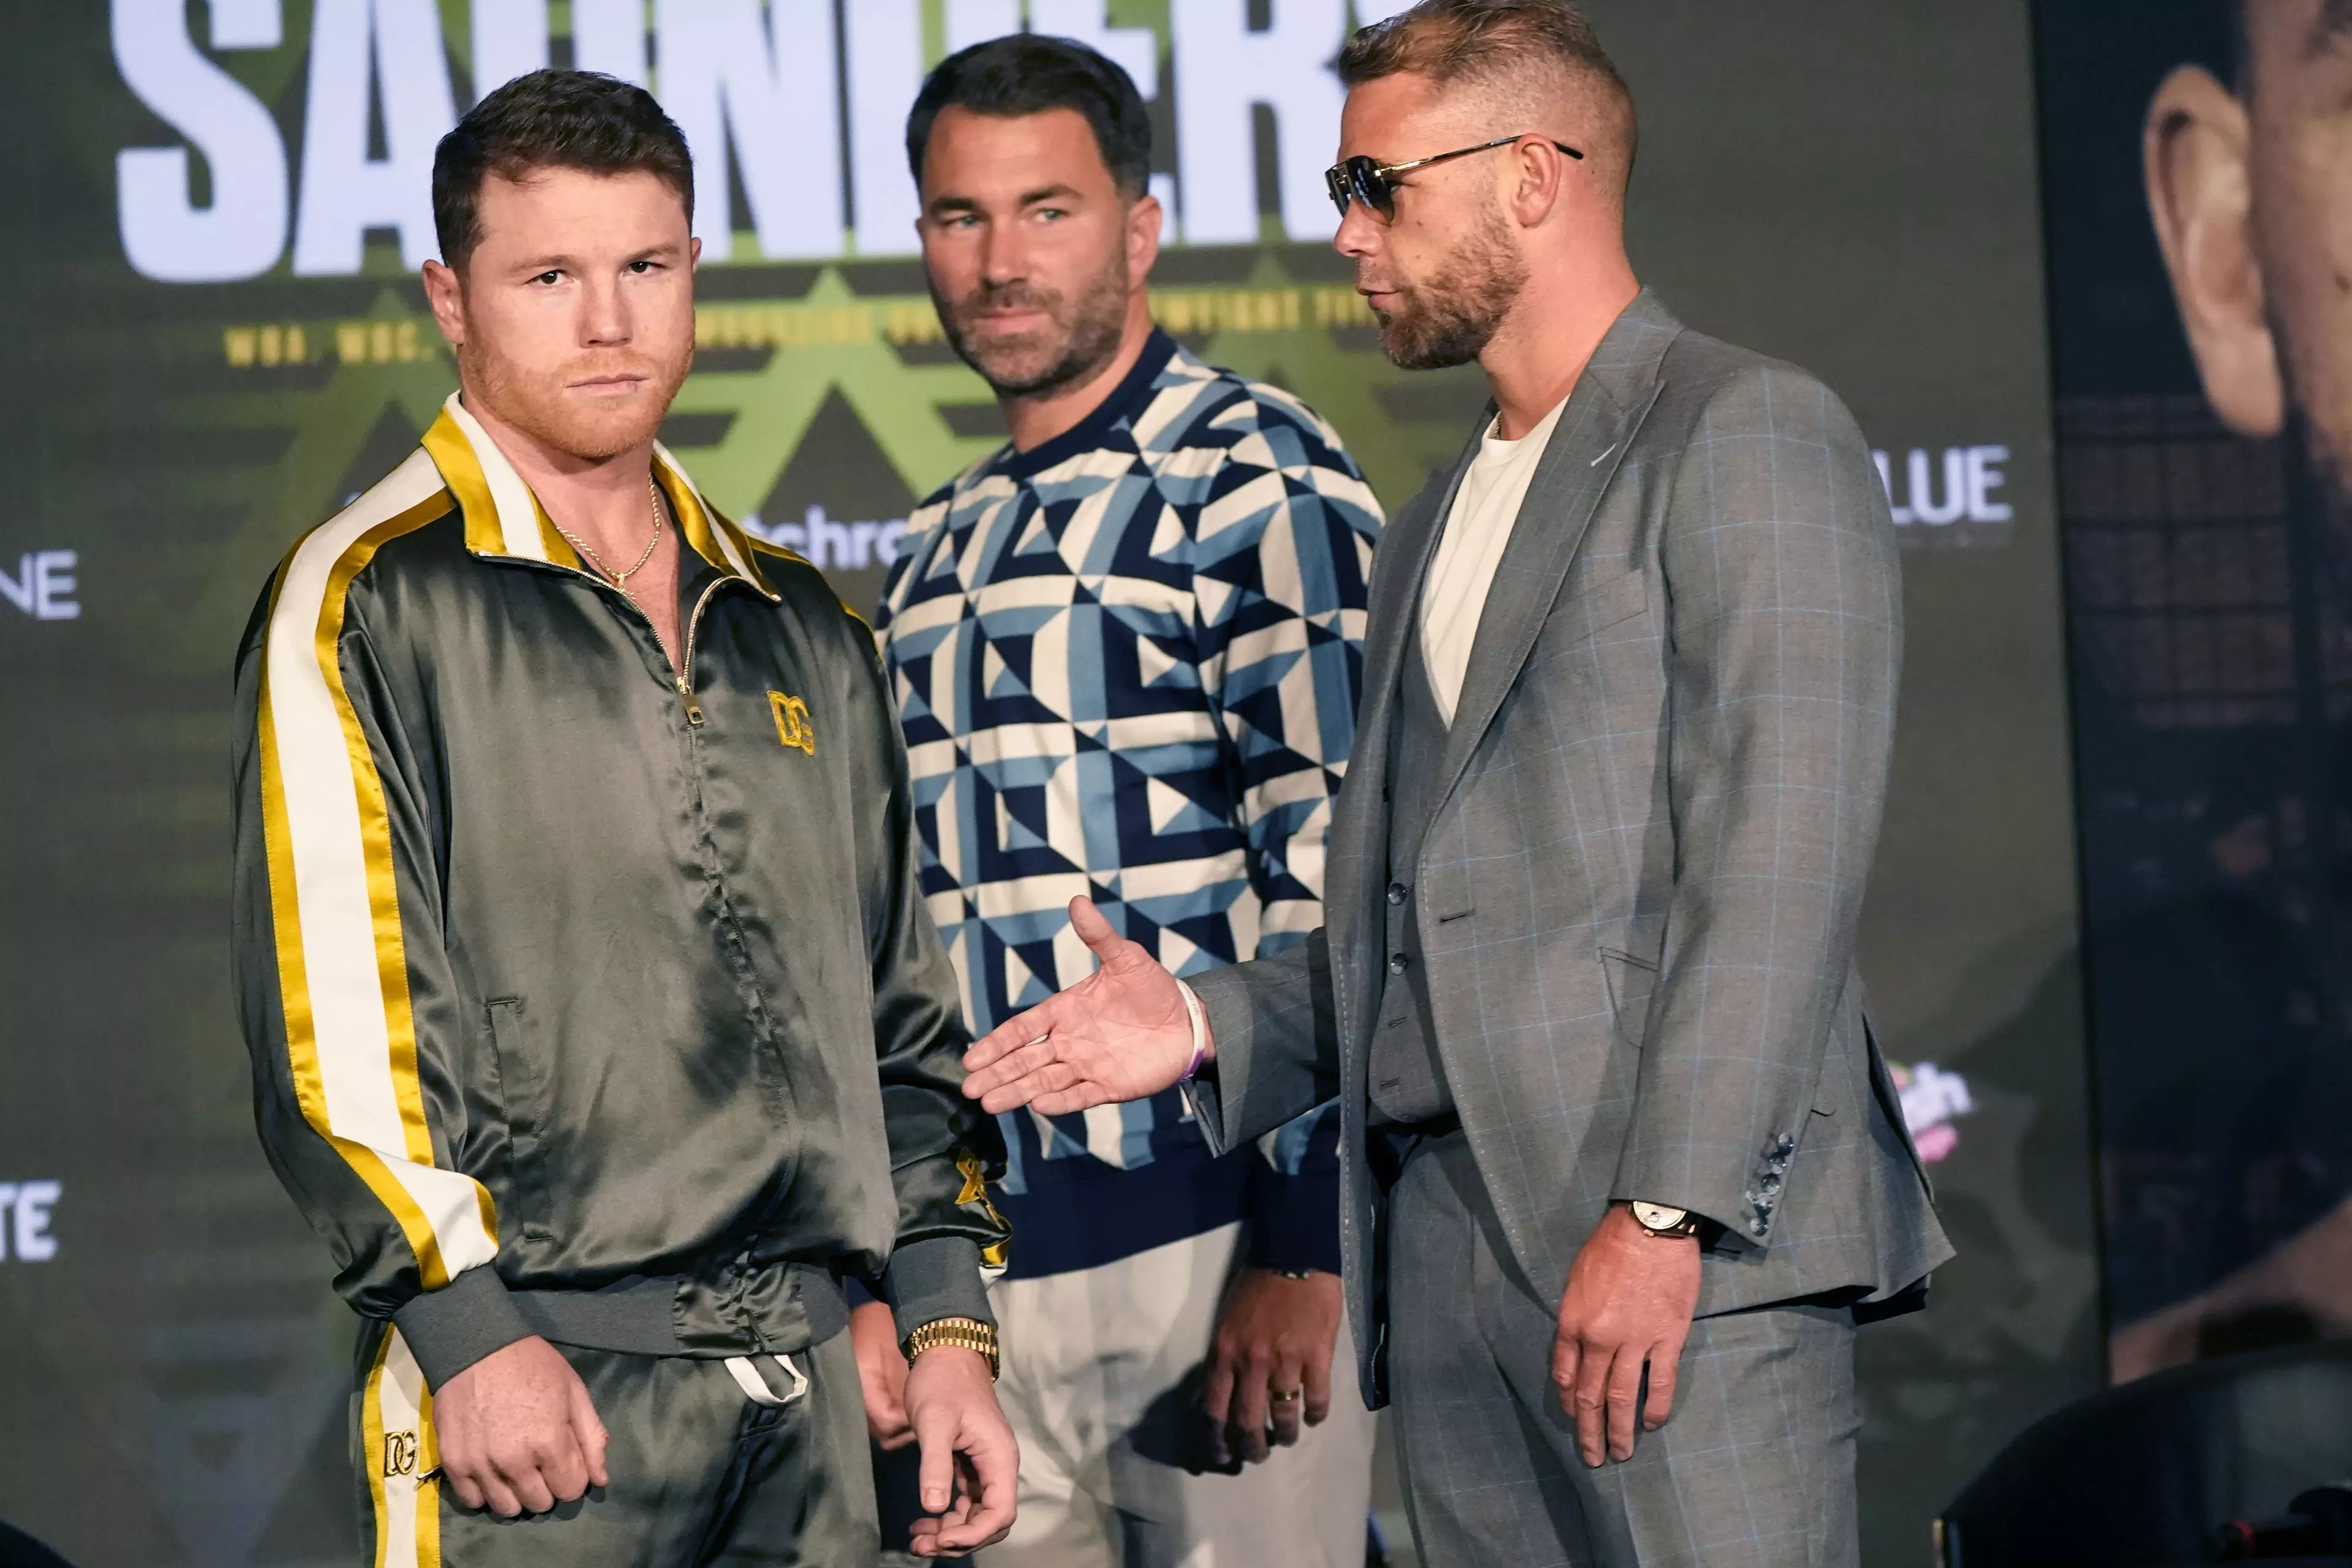 Canelo fight Billy Joe Saunders, right, at a much higher weight than when he lost to Mayweather. Image: PA Images